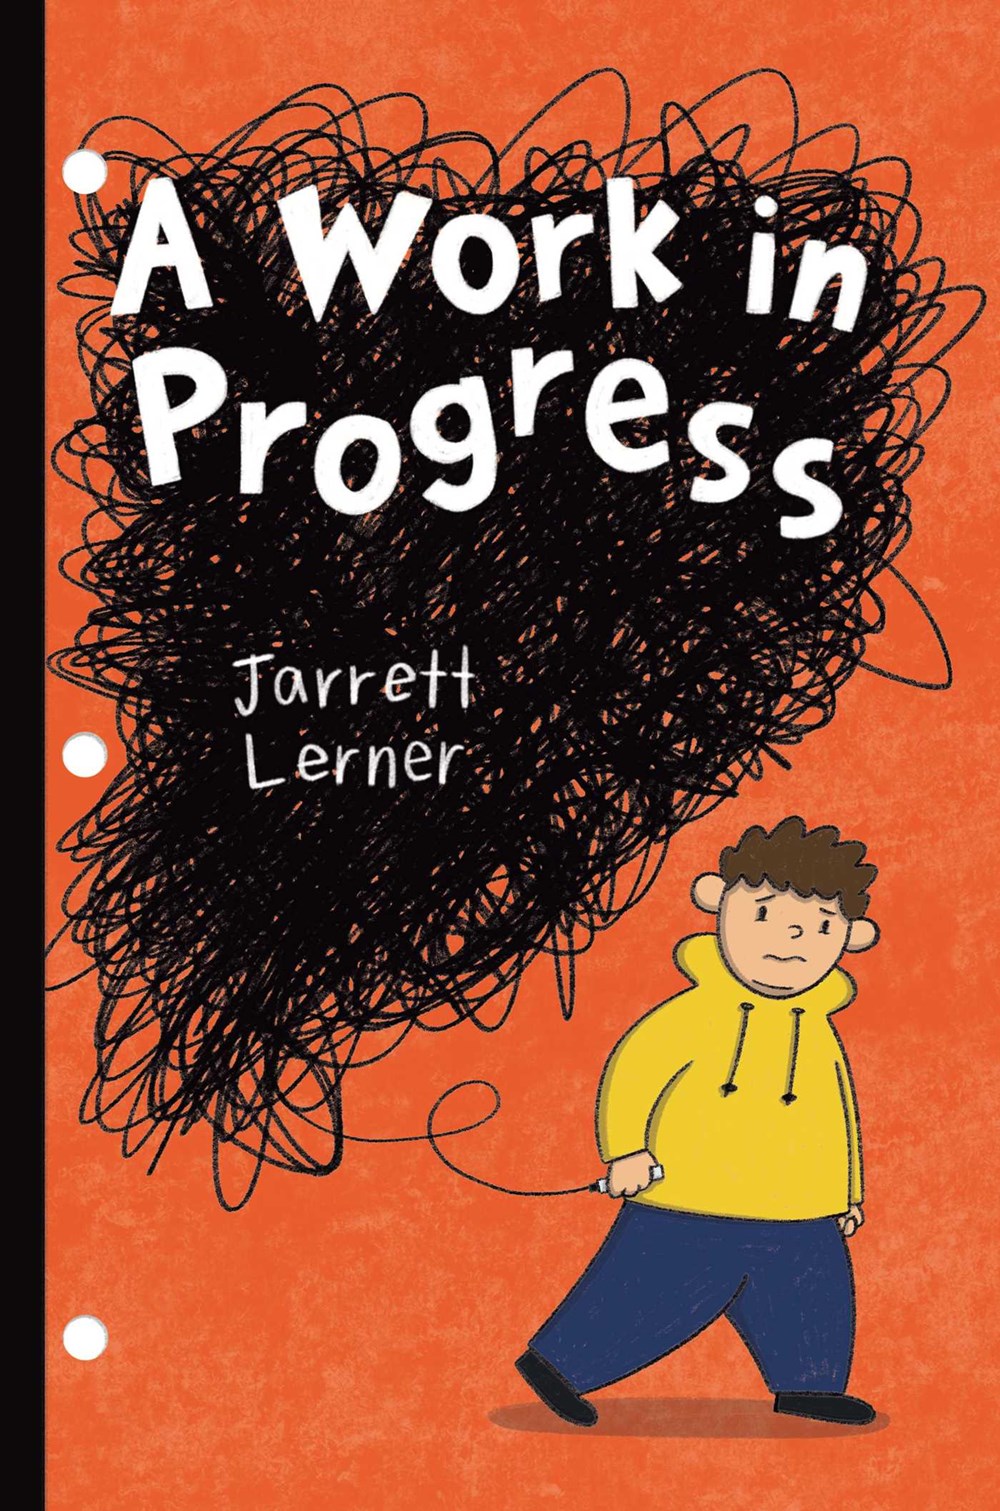 Behind the Scenes of A WORK IN PROGRESS with Jarrett Lerner